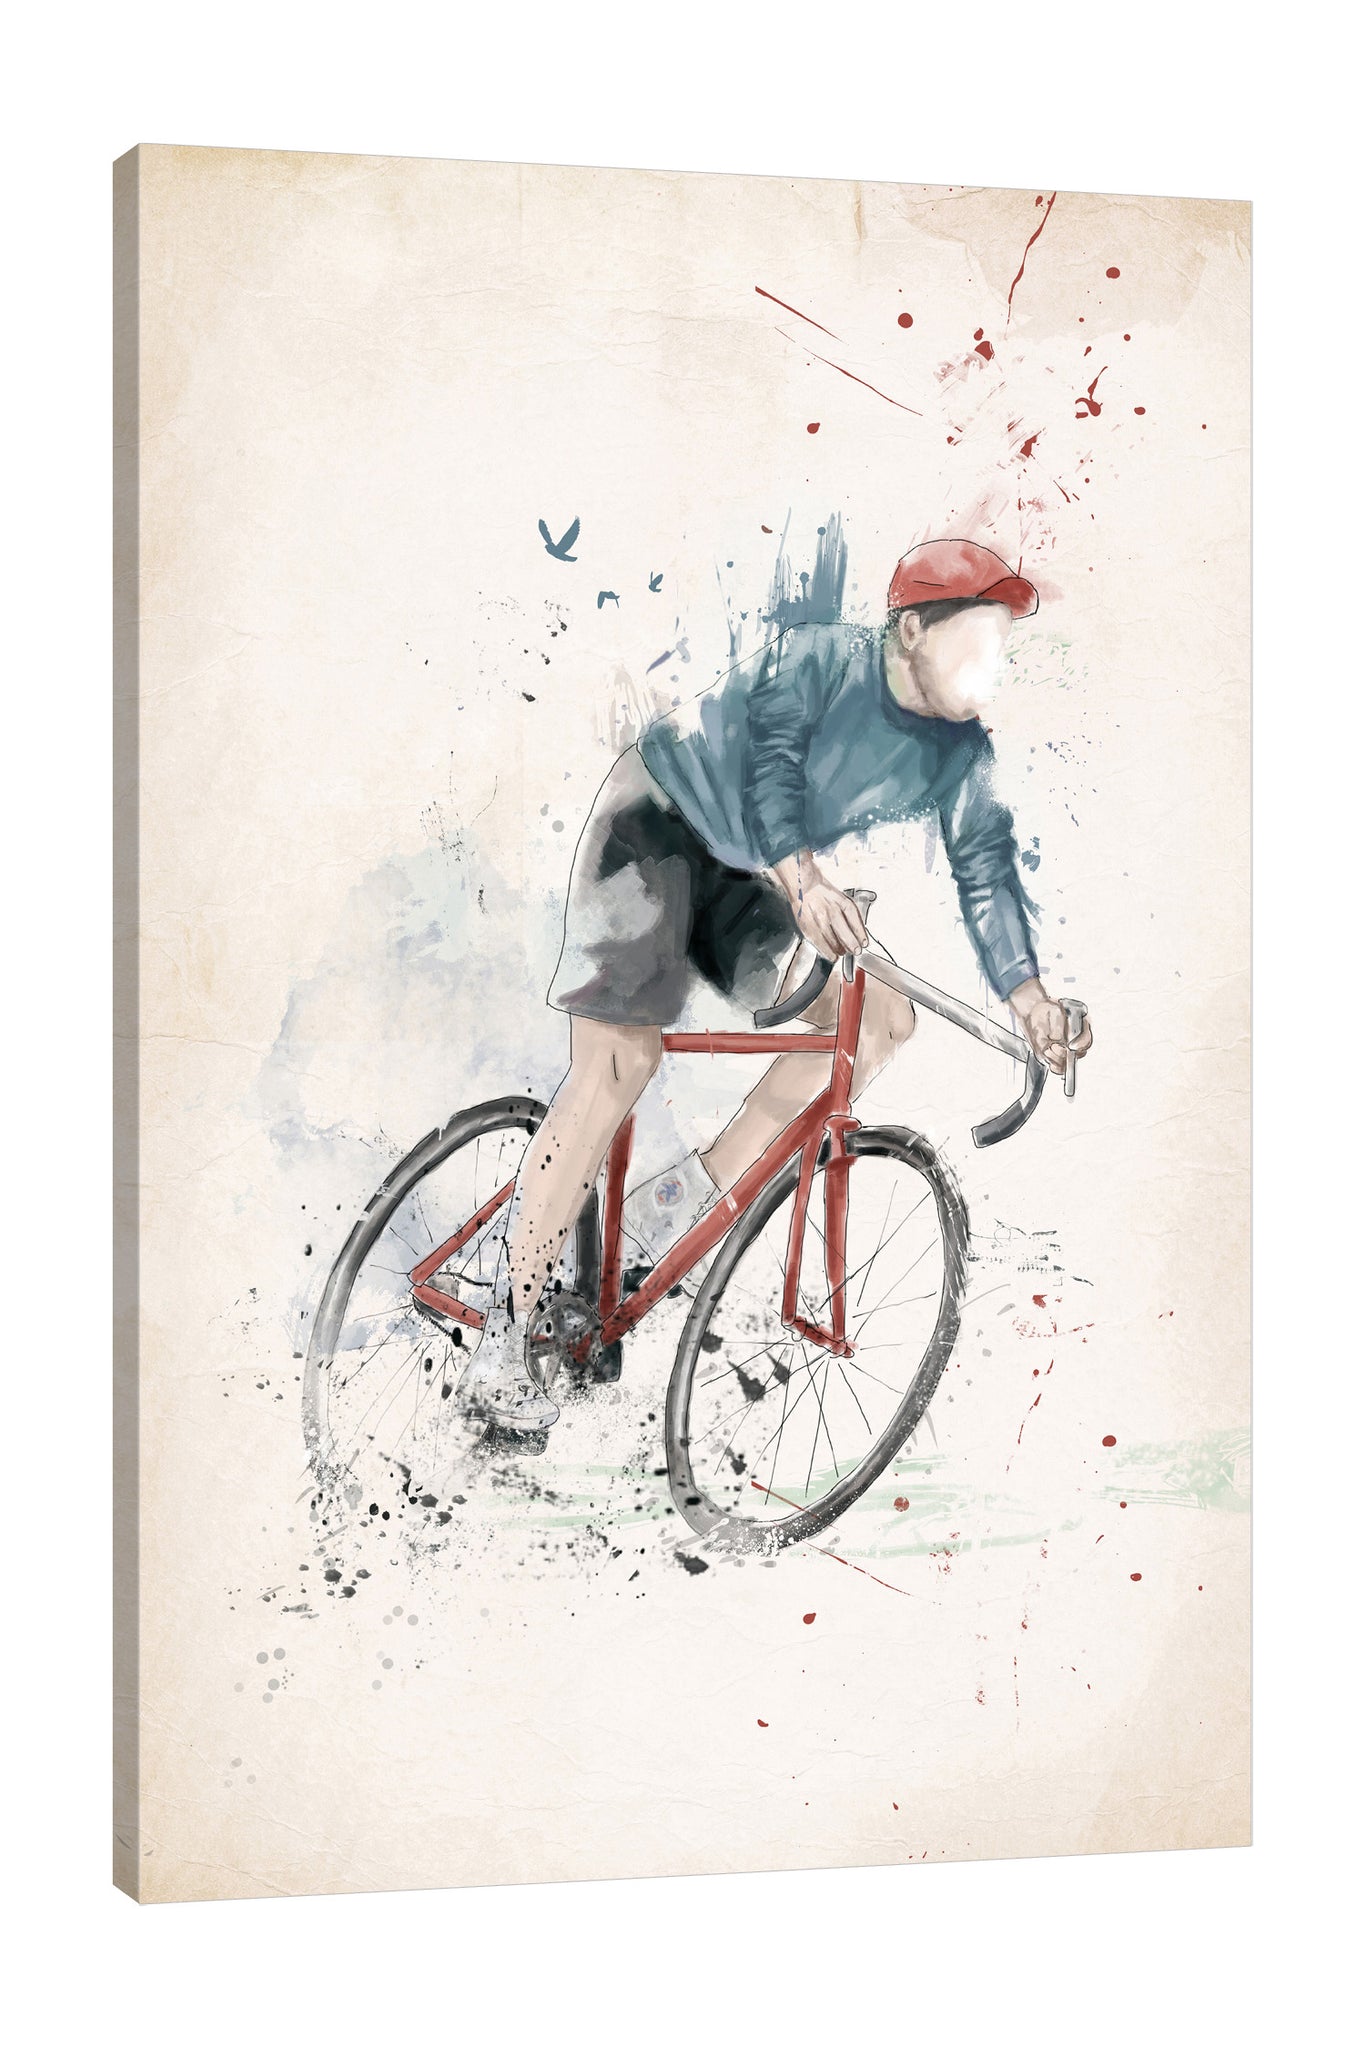 Balazs-Solti,Modern & Contemporary,People,Transportation,Animals,man,men,bicycle,bicycles,transportation,bike,bikes,splatters,splatter,birds,bird,animals,animal,Mist Gray,Lavender Purple,Gray,Sky Blue,Charcoal Gray,Salmon Pink,Yellow,White